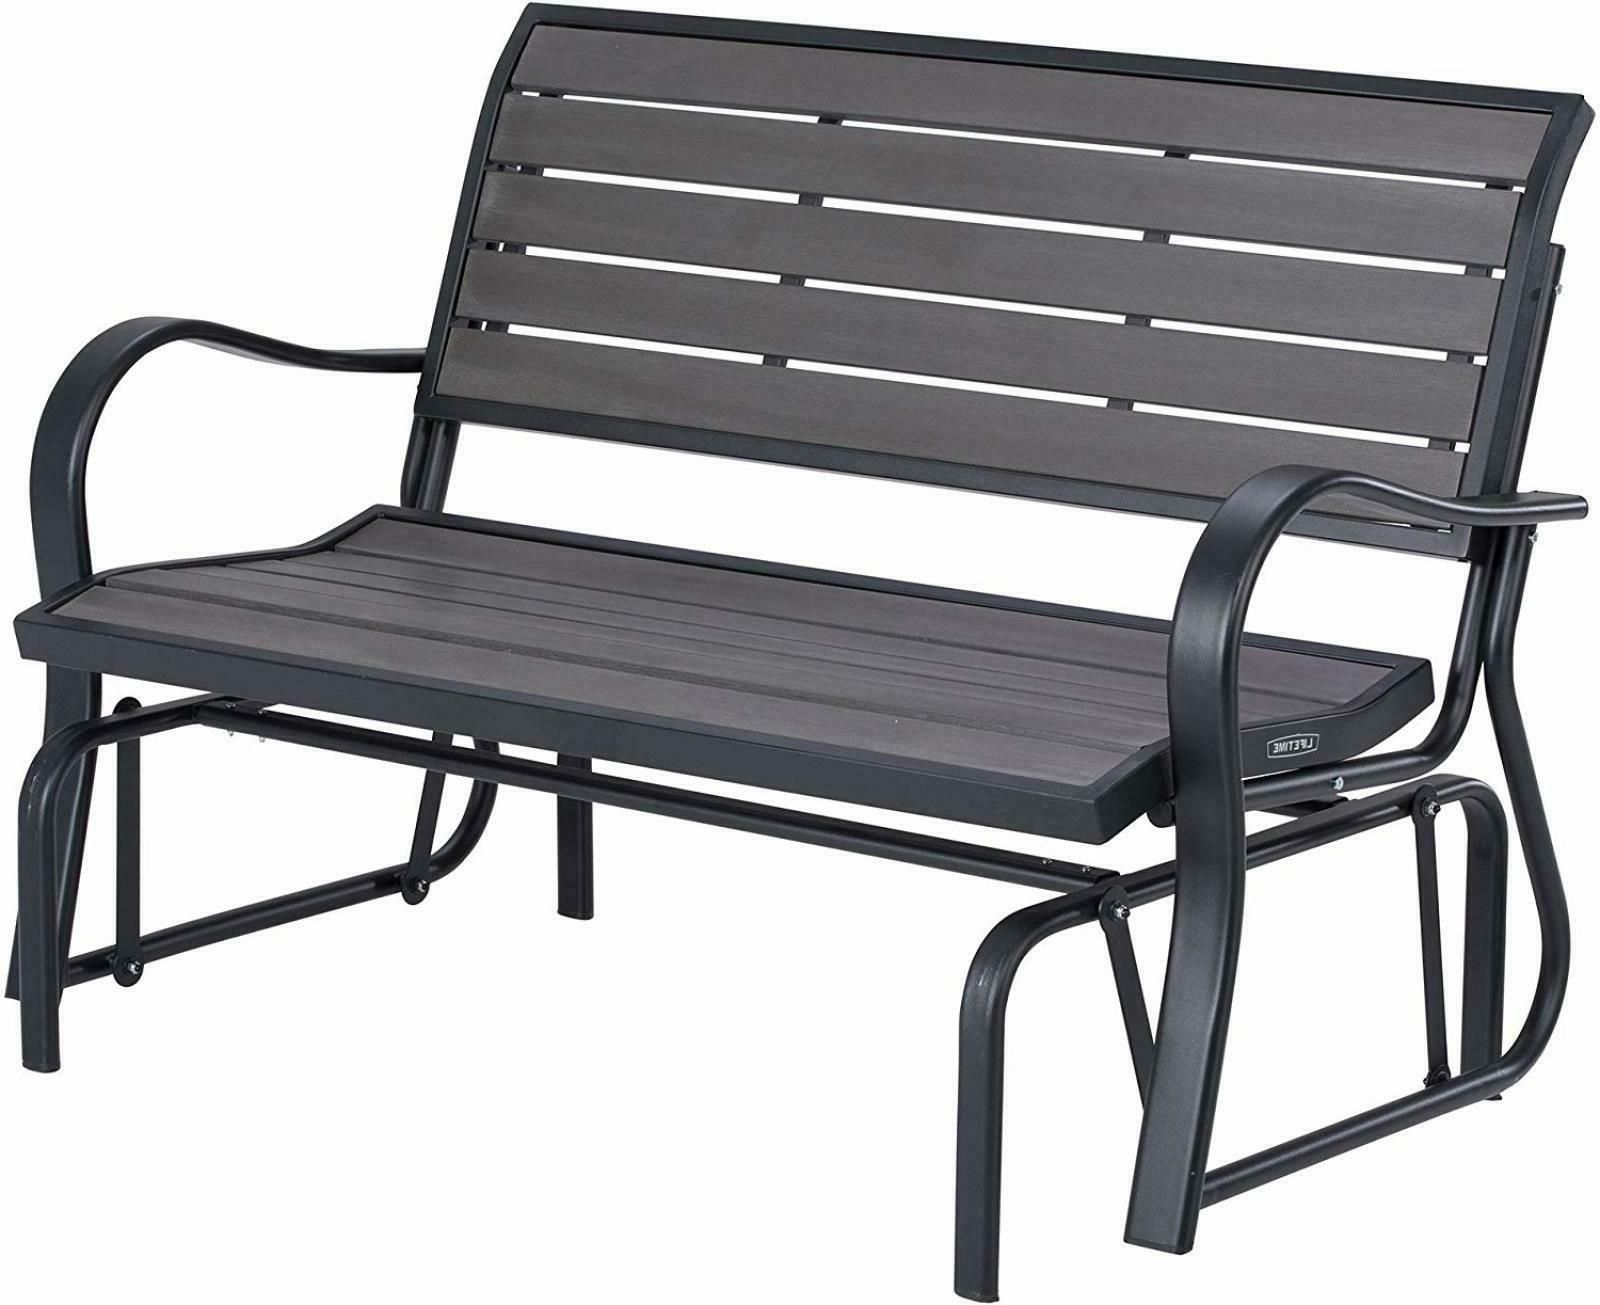 Patio Swing Loveseat Chair 2 People Seats Outdoor Glider Steel Frame Grey  Bench With Famous Steel Patio Swing Glider Benches (View 10 of 30)